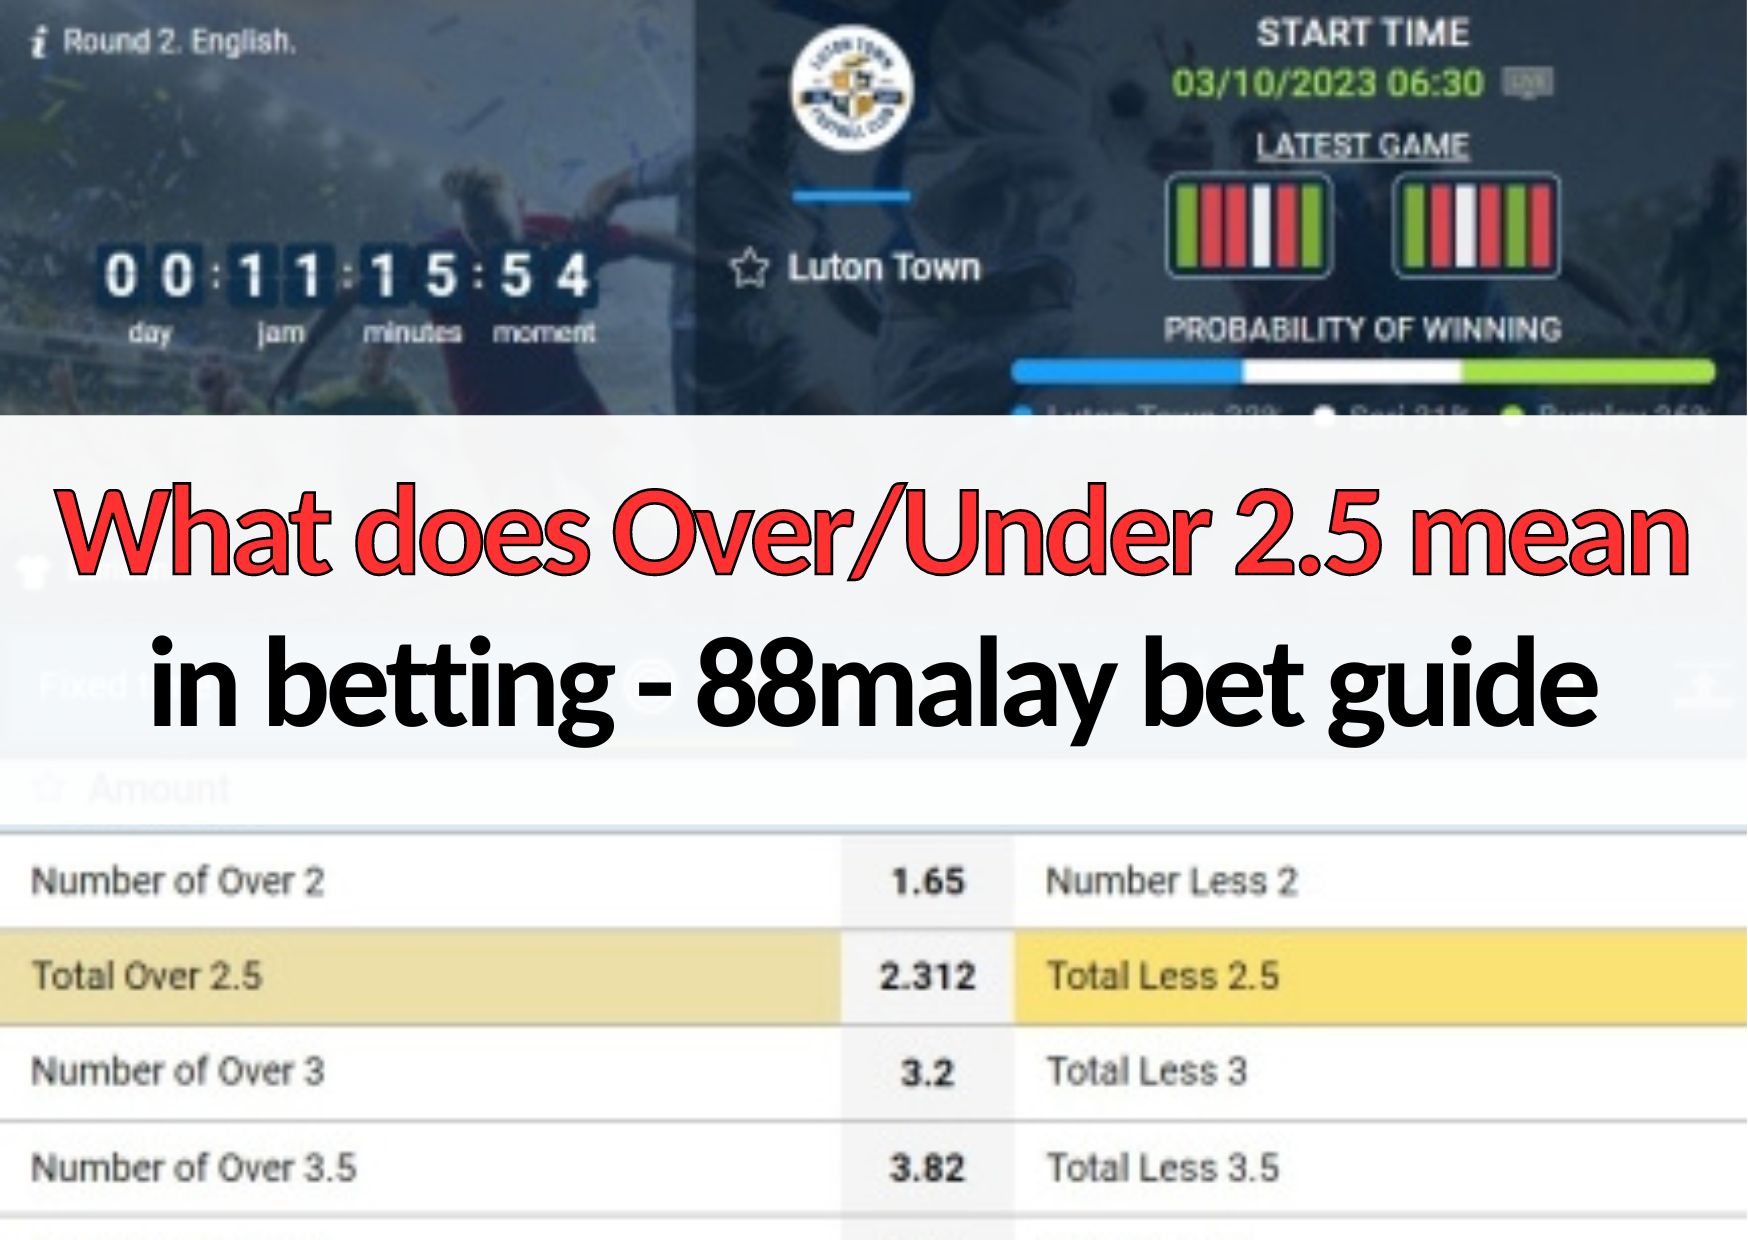 88malay 1xbet what does over under 2.5 mean in betting